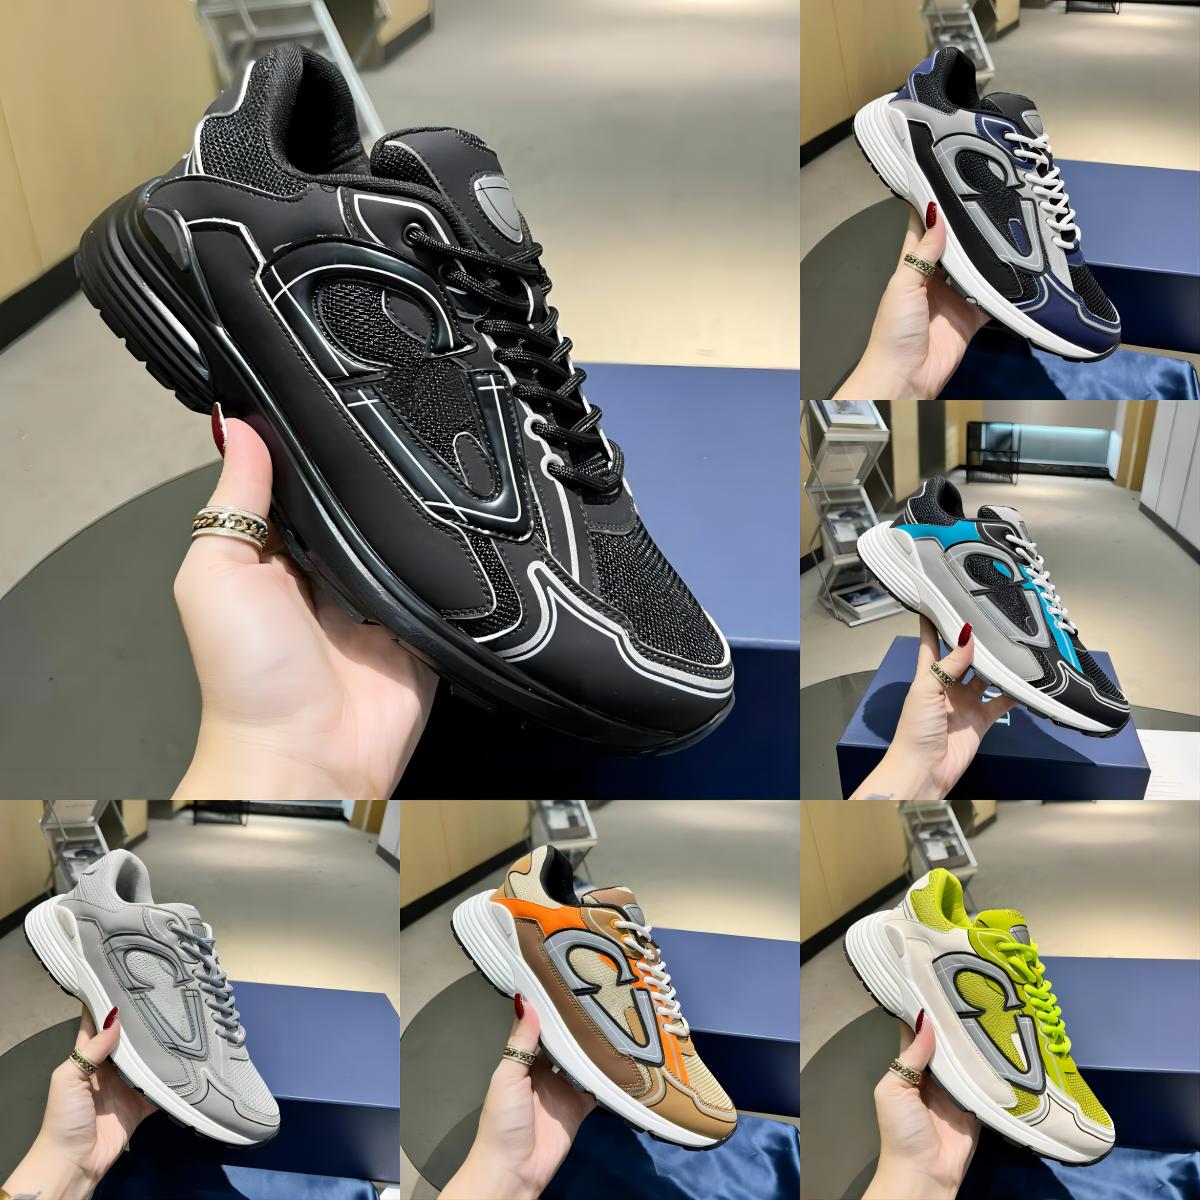 

Designer Sneakers Men Women shoes Vintage Chunky Casual Shoes Calfskin Mesh Grey Technical Oblique Runner Trainers Outdoor Shoe with box size 35-47, Color 9